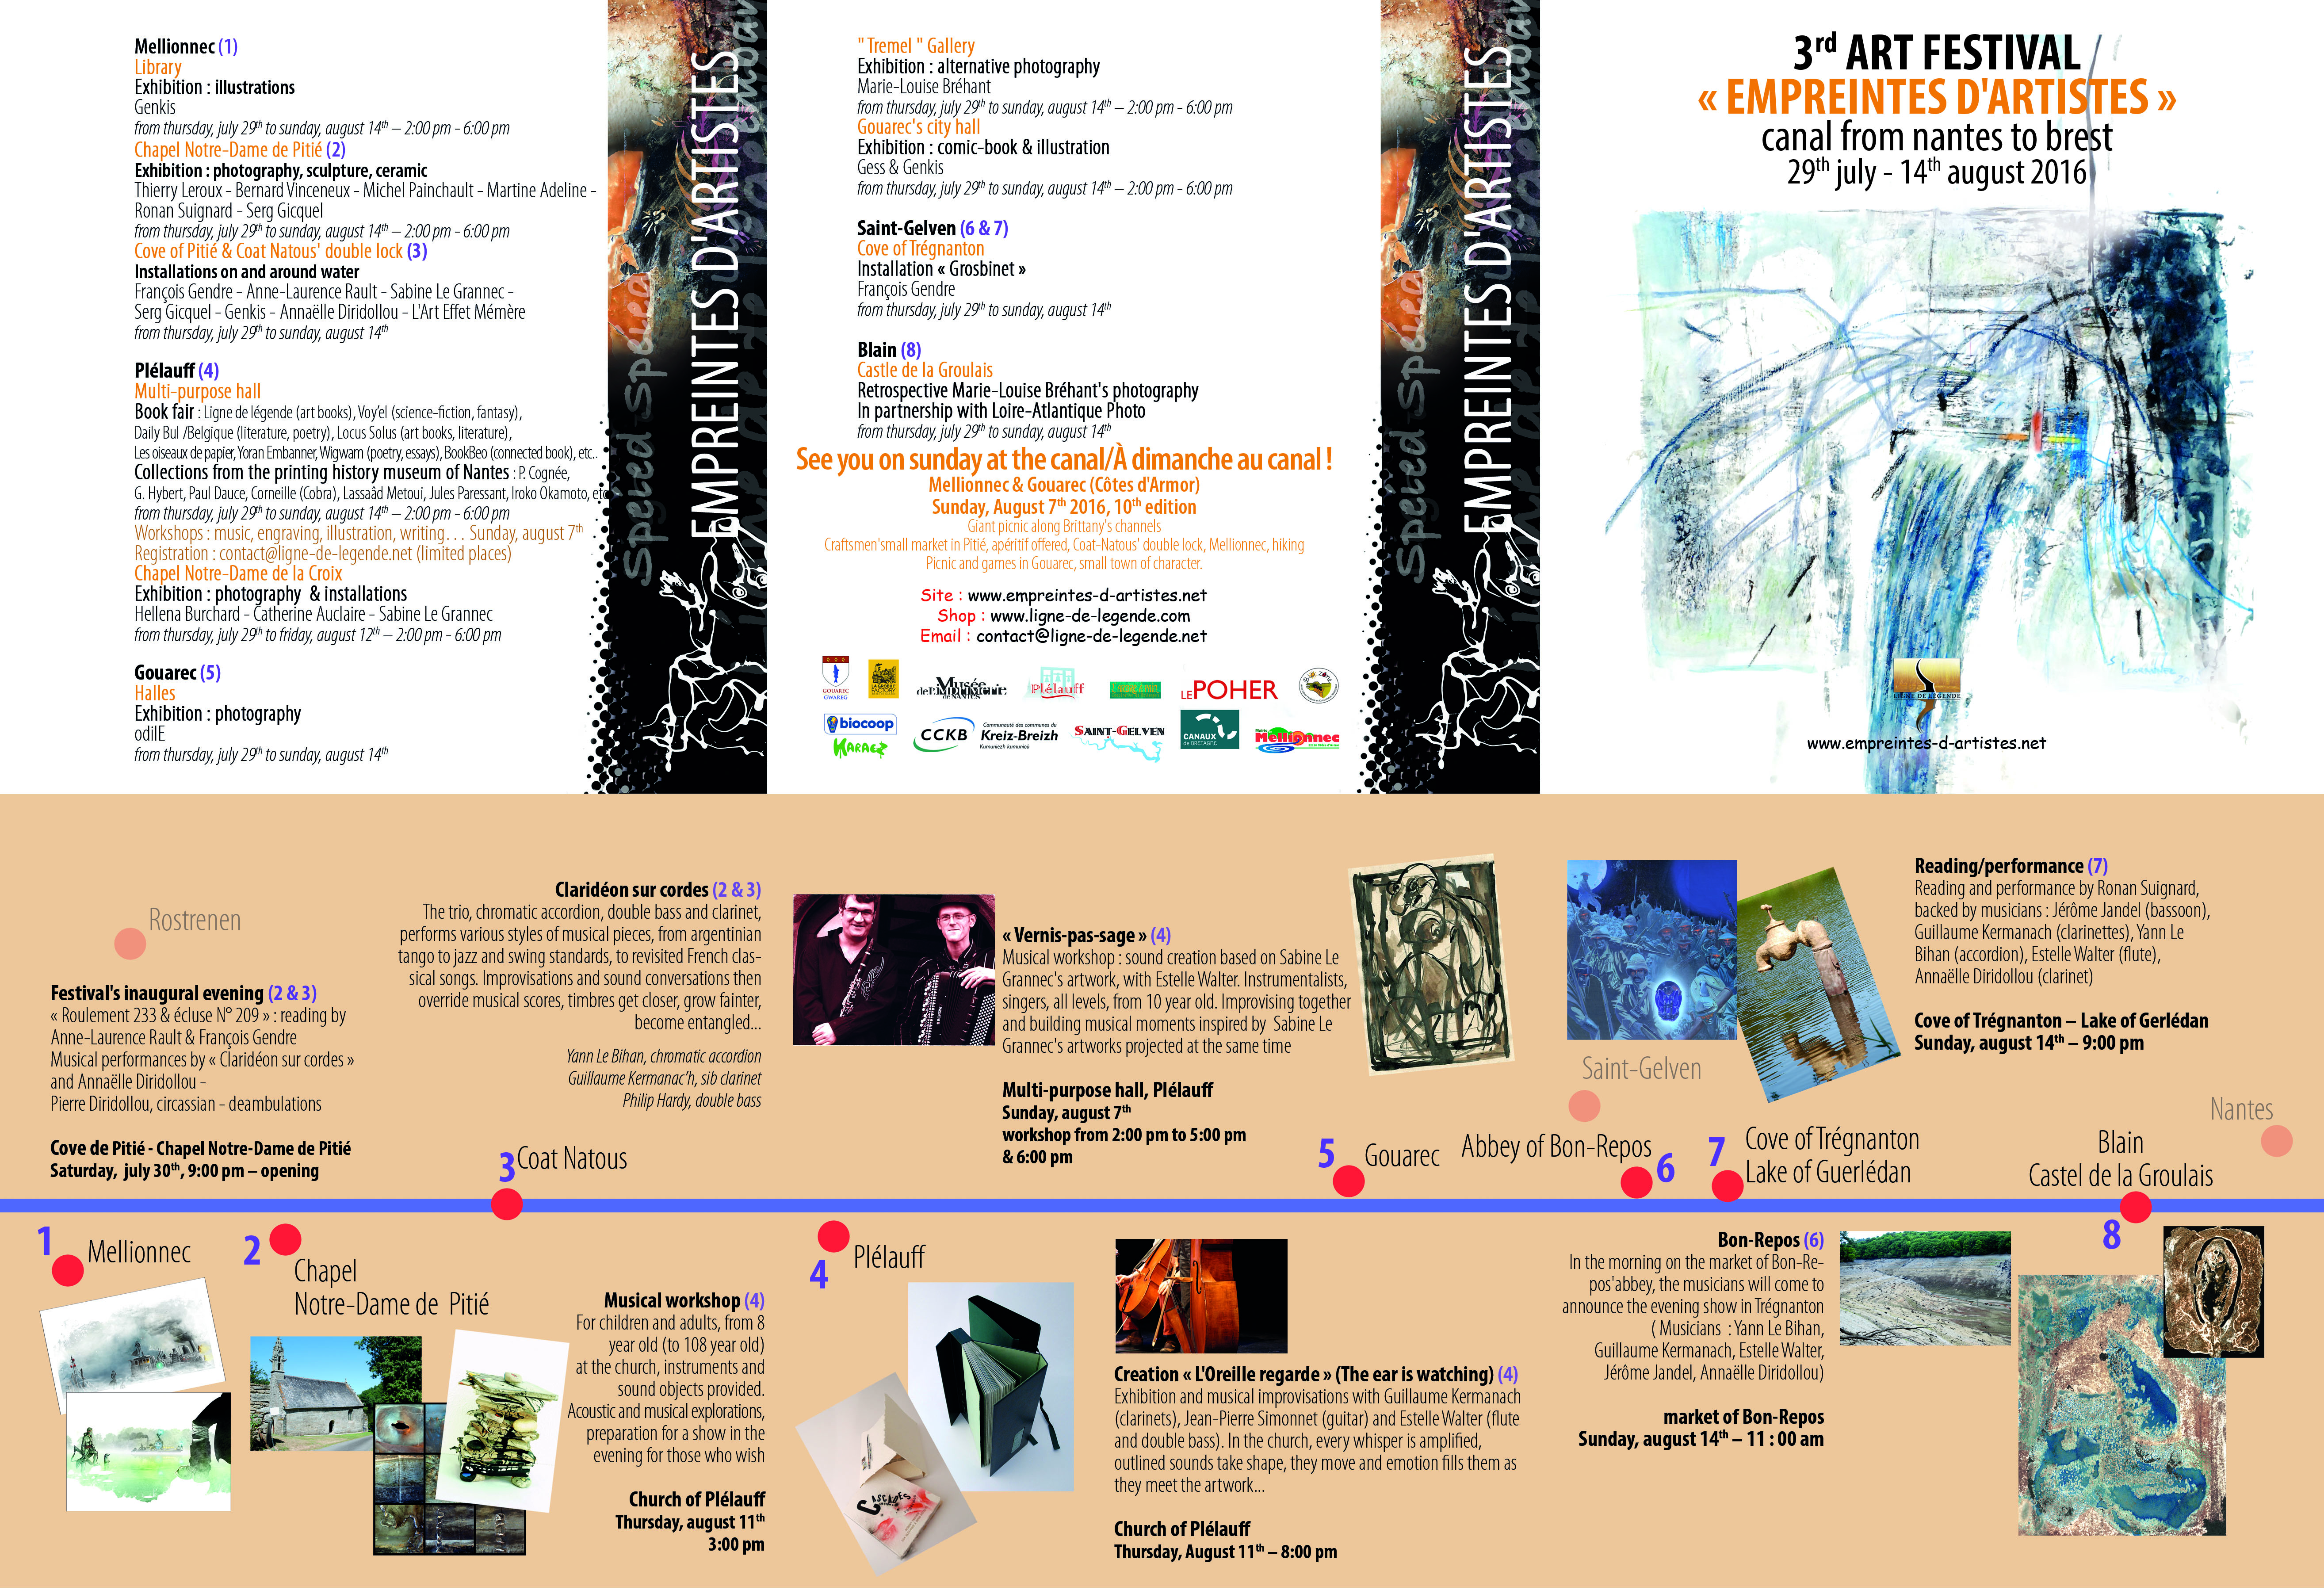 This is the programme for the Art Festival Empreintes d'artistes 2016 in English